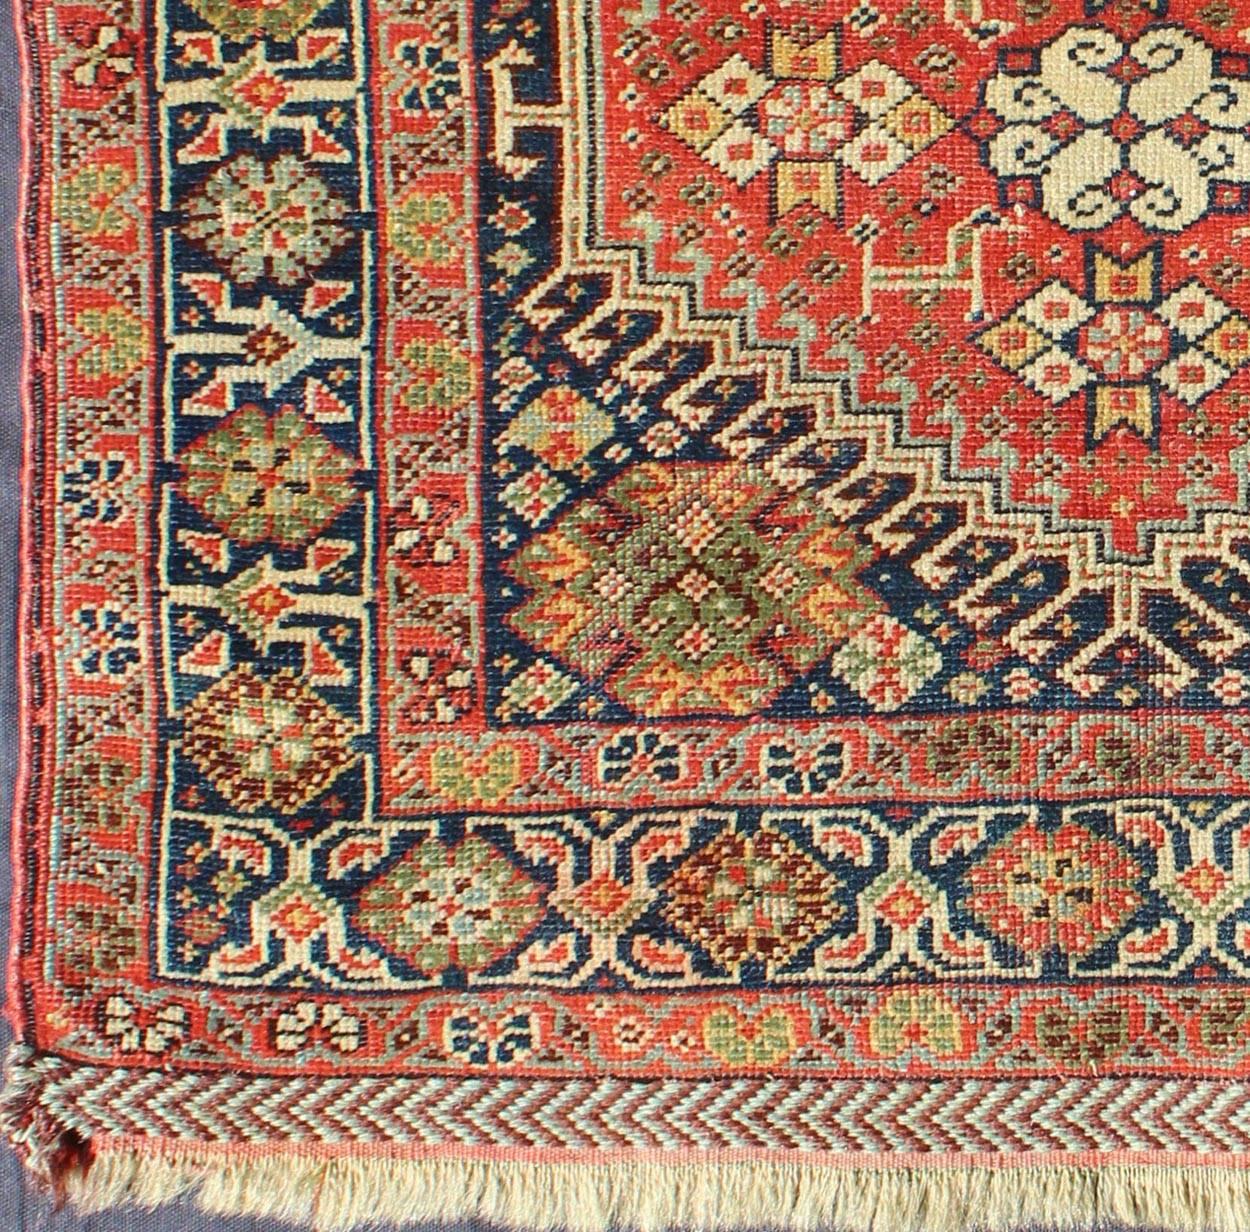 Antique Persian, extremely finely woven antique Qashqai Bag Face in Brilliant colors with hexagon Latch Hook Medallion, rug a-0406, country of origin / type: Iran / Qashqai, circa 1870.

This antique Qashqai rug from late 19th century Persian